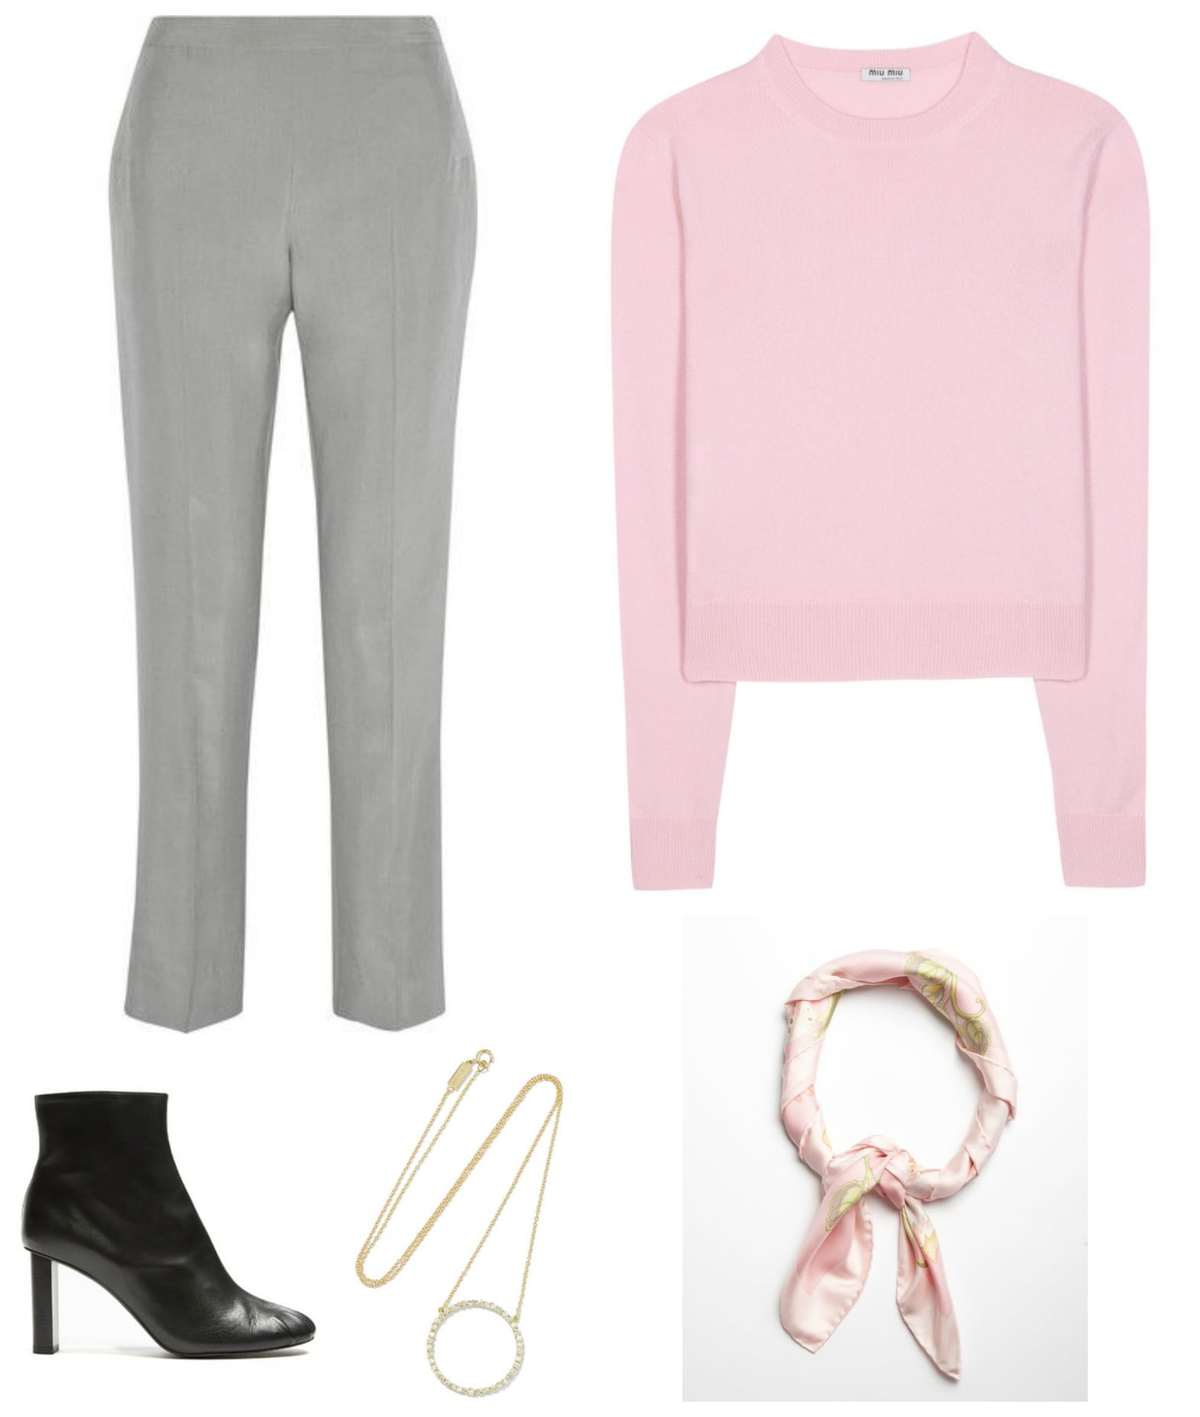 outfit42